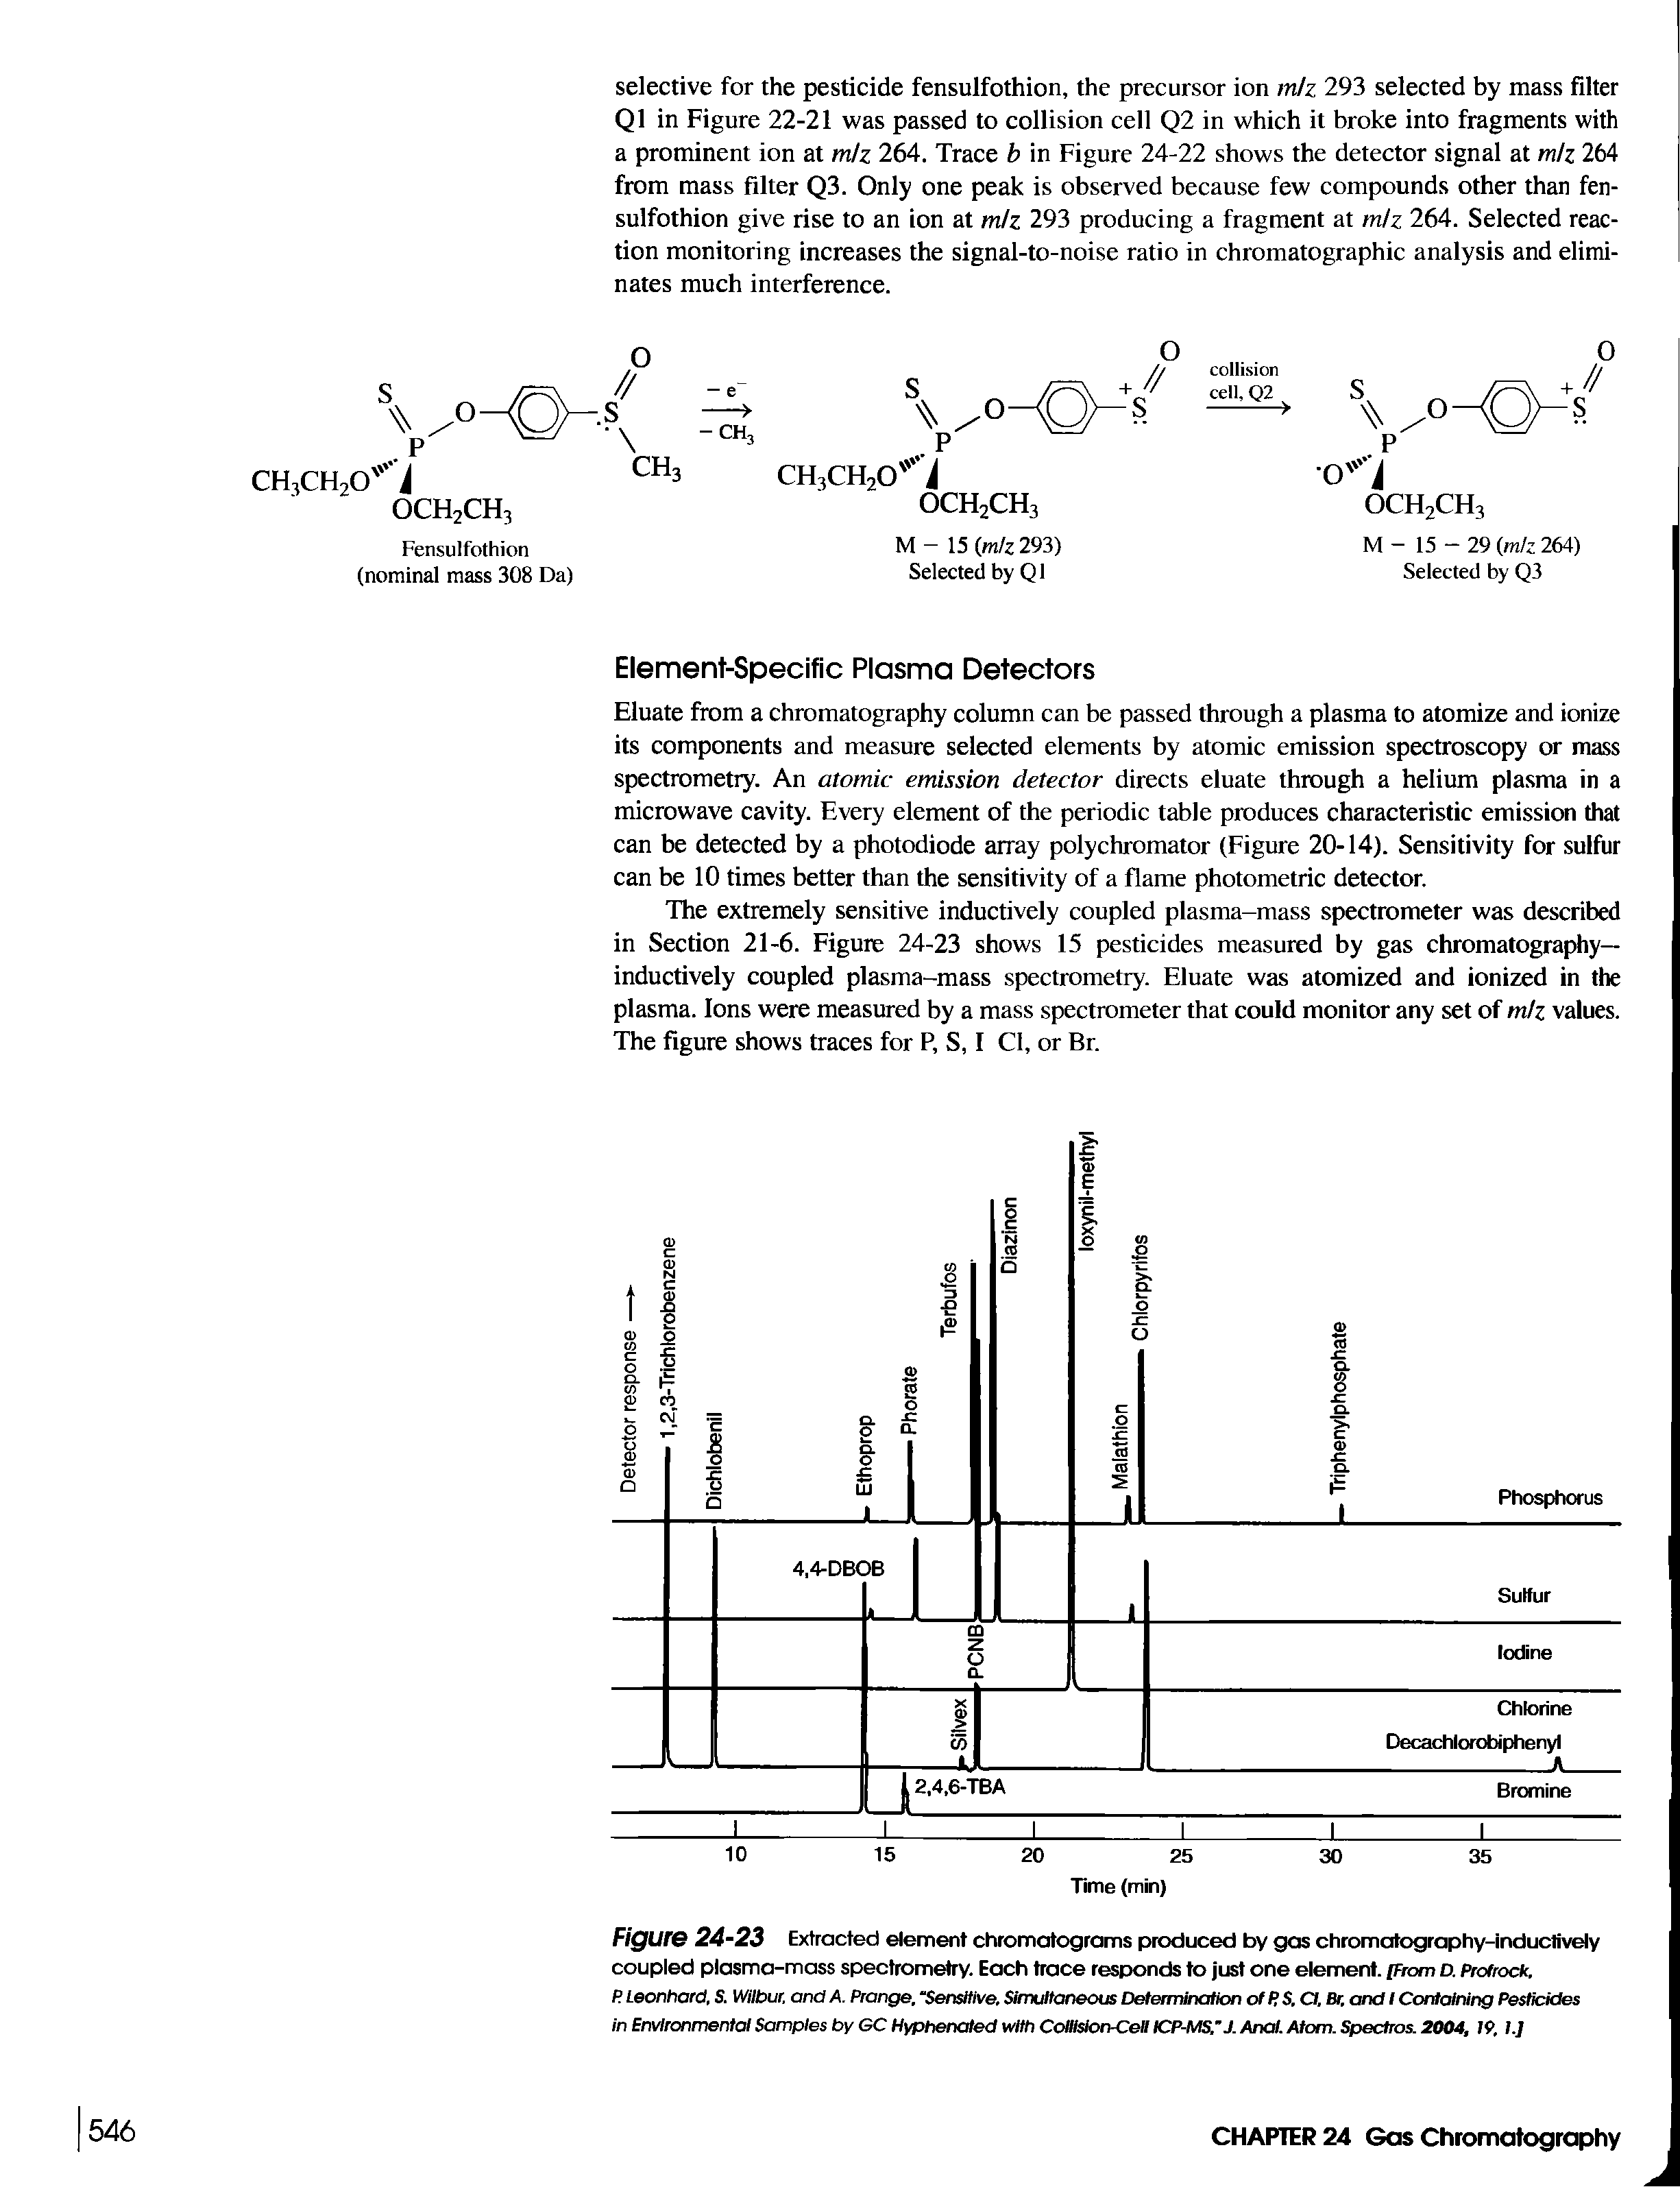 FigurB 24-23 Extracted element chromatograms produced by gas chromatography-inductively coupled plasma-mass spectrometry. Each trace responds to just one element. [From D. Protrock.